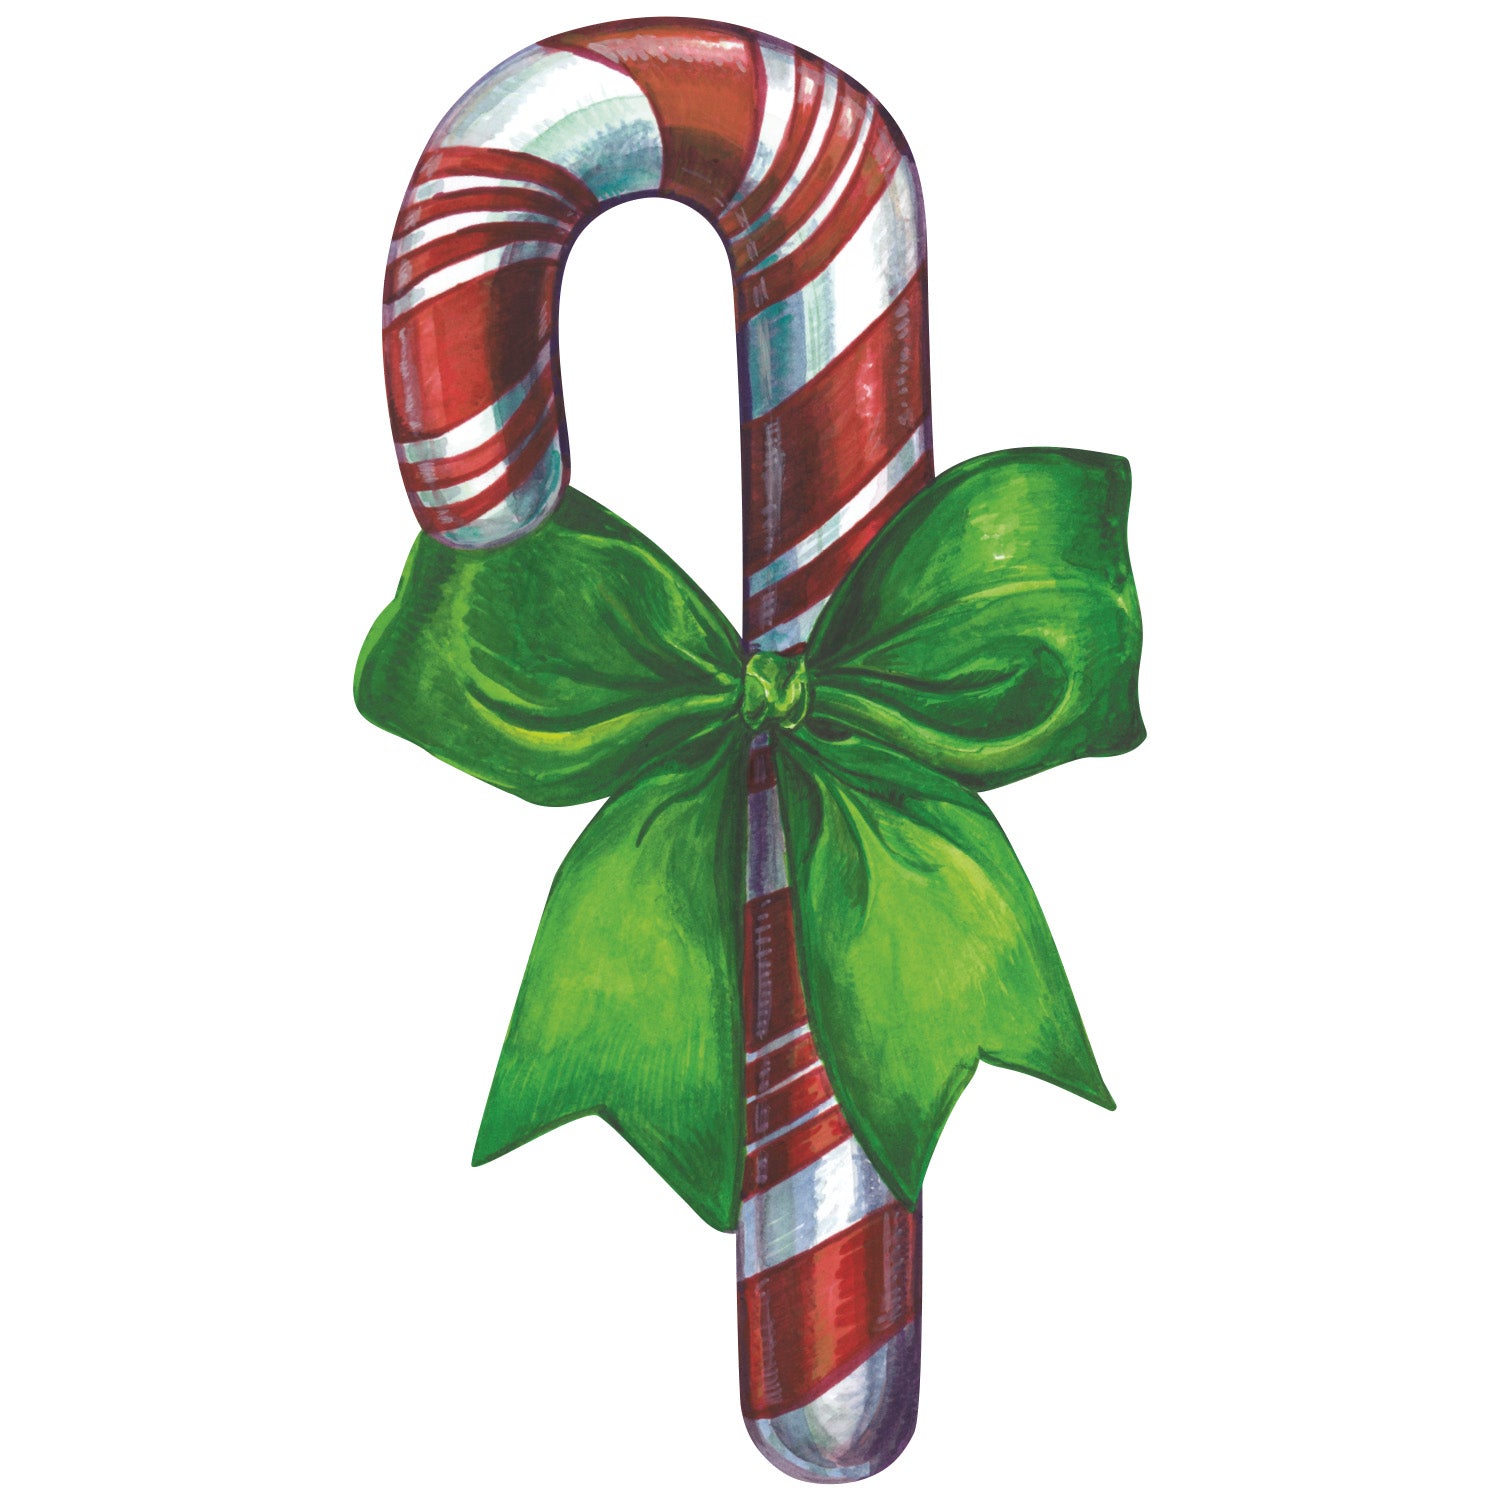 Paper placemat in the shape of an oversized Candy Cane tied with a Green Ribbon